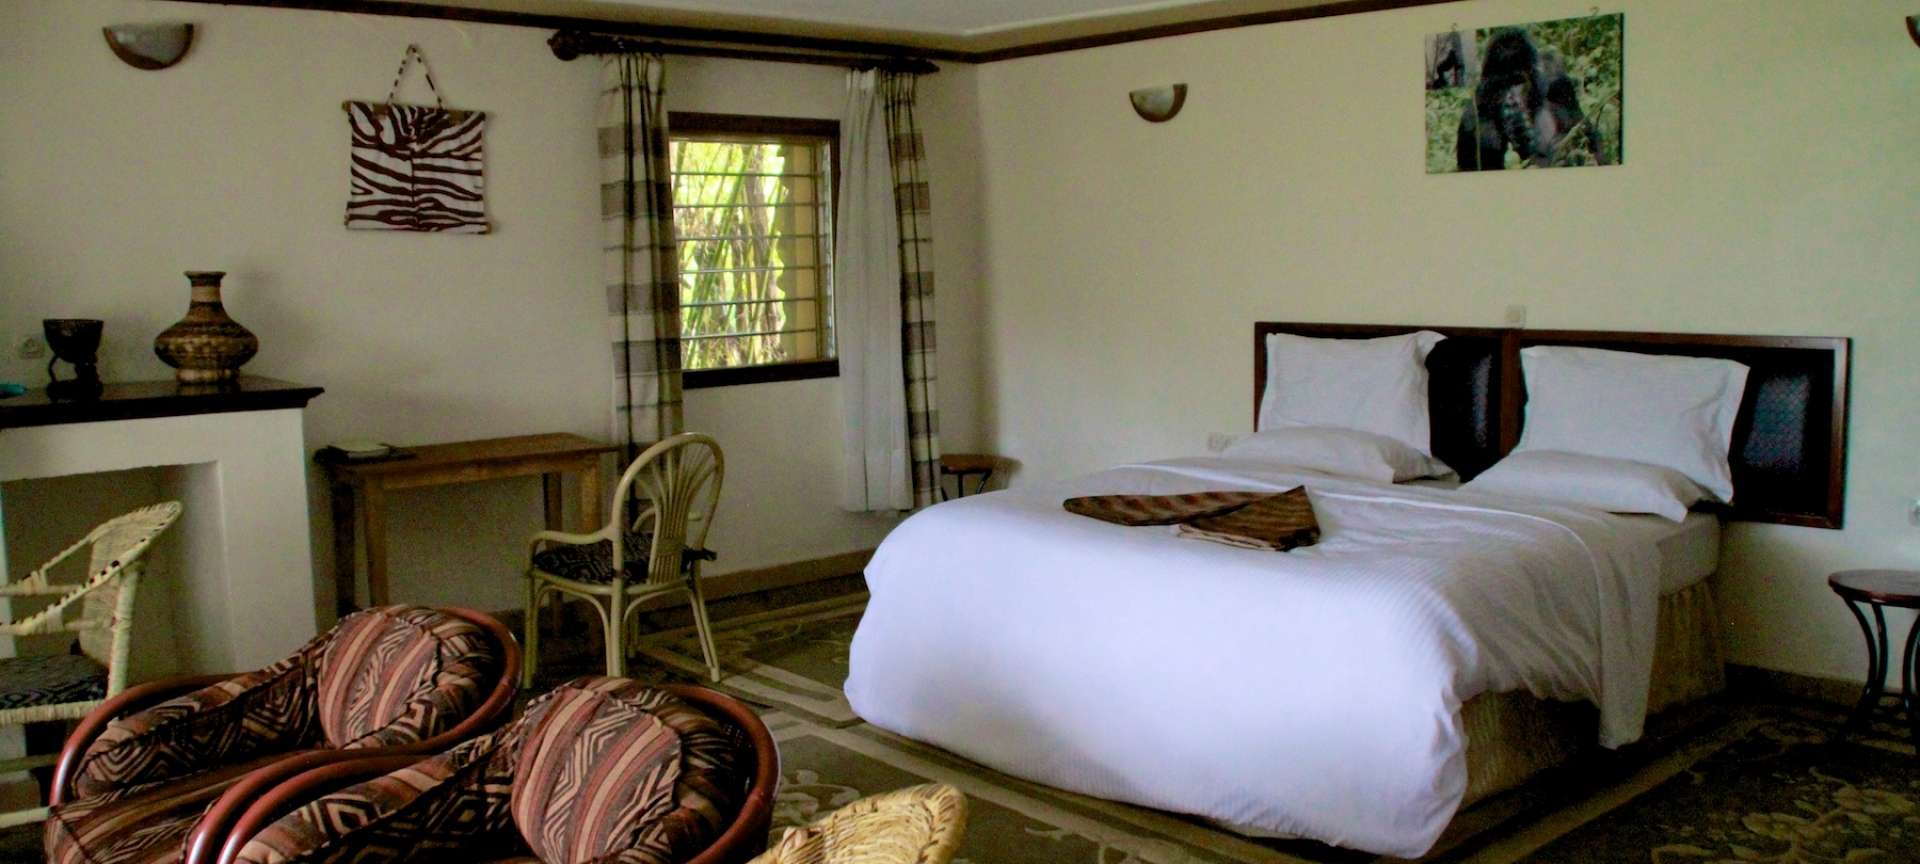 LUXURY ACCOMMODATION IN VOLCANOES NATIONAL PARK